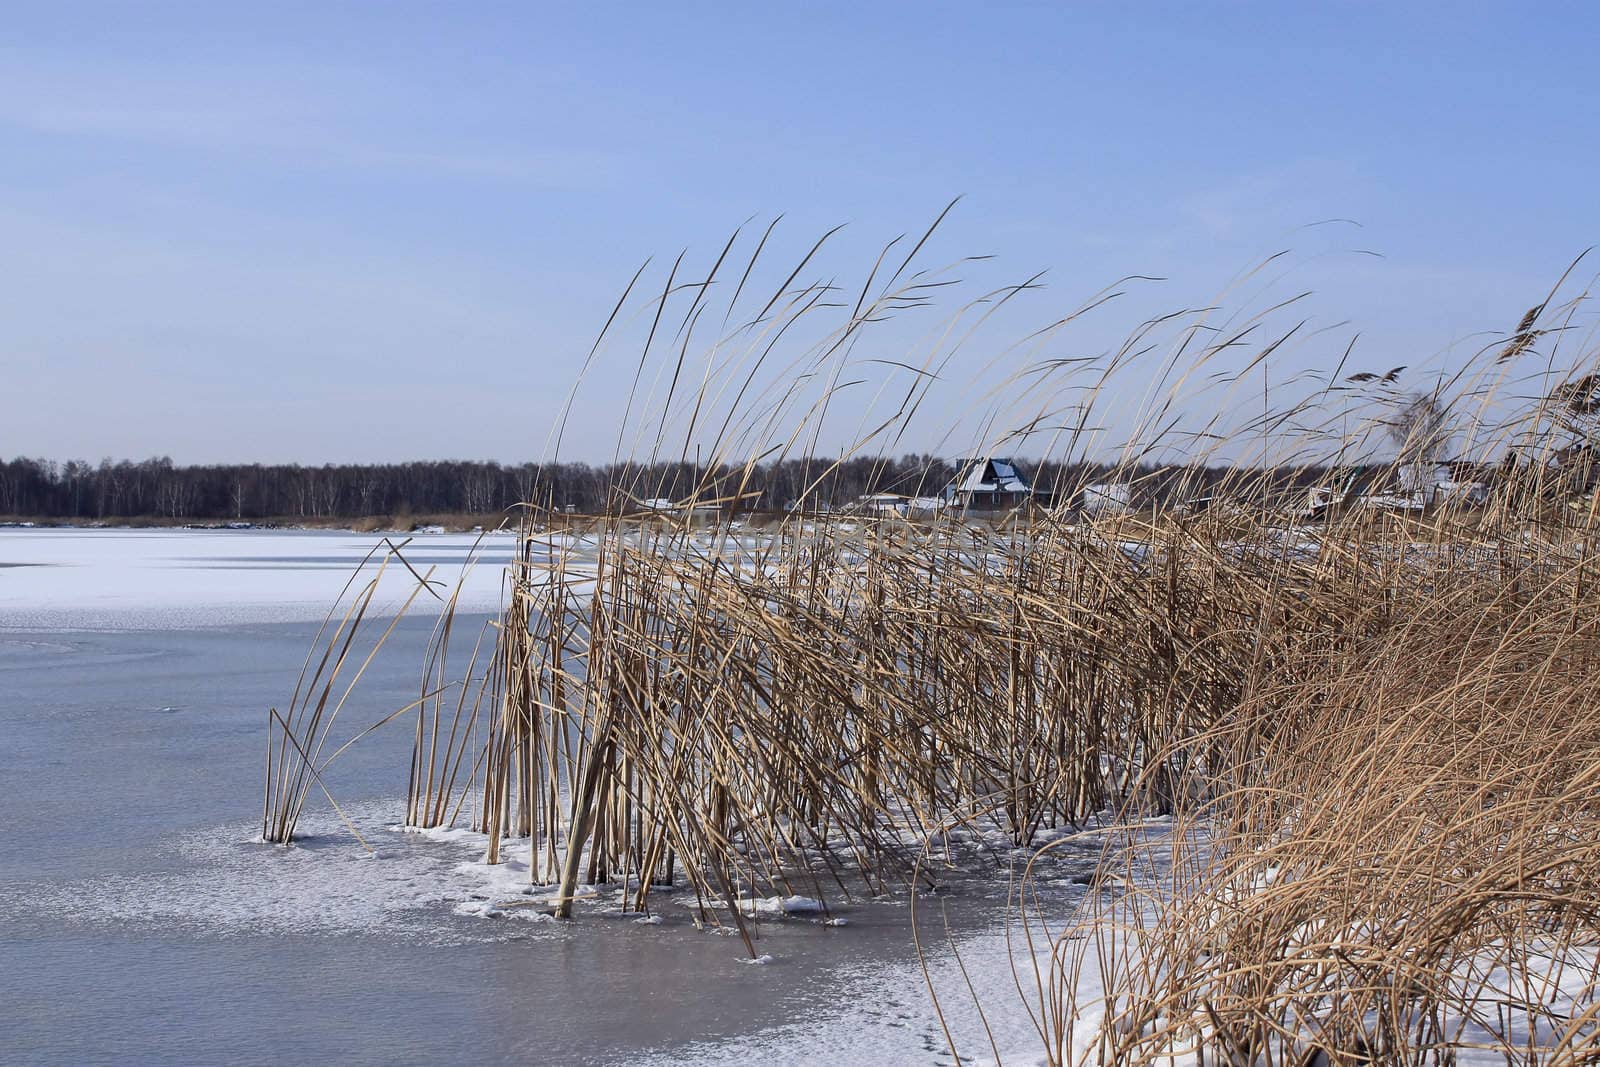 Snow has dropped out, the lake has become covered by ice. Ashore the dry grass is visible